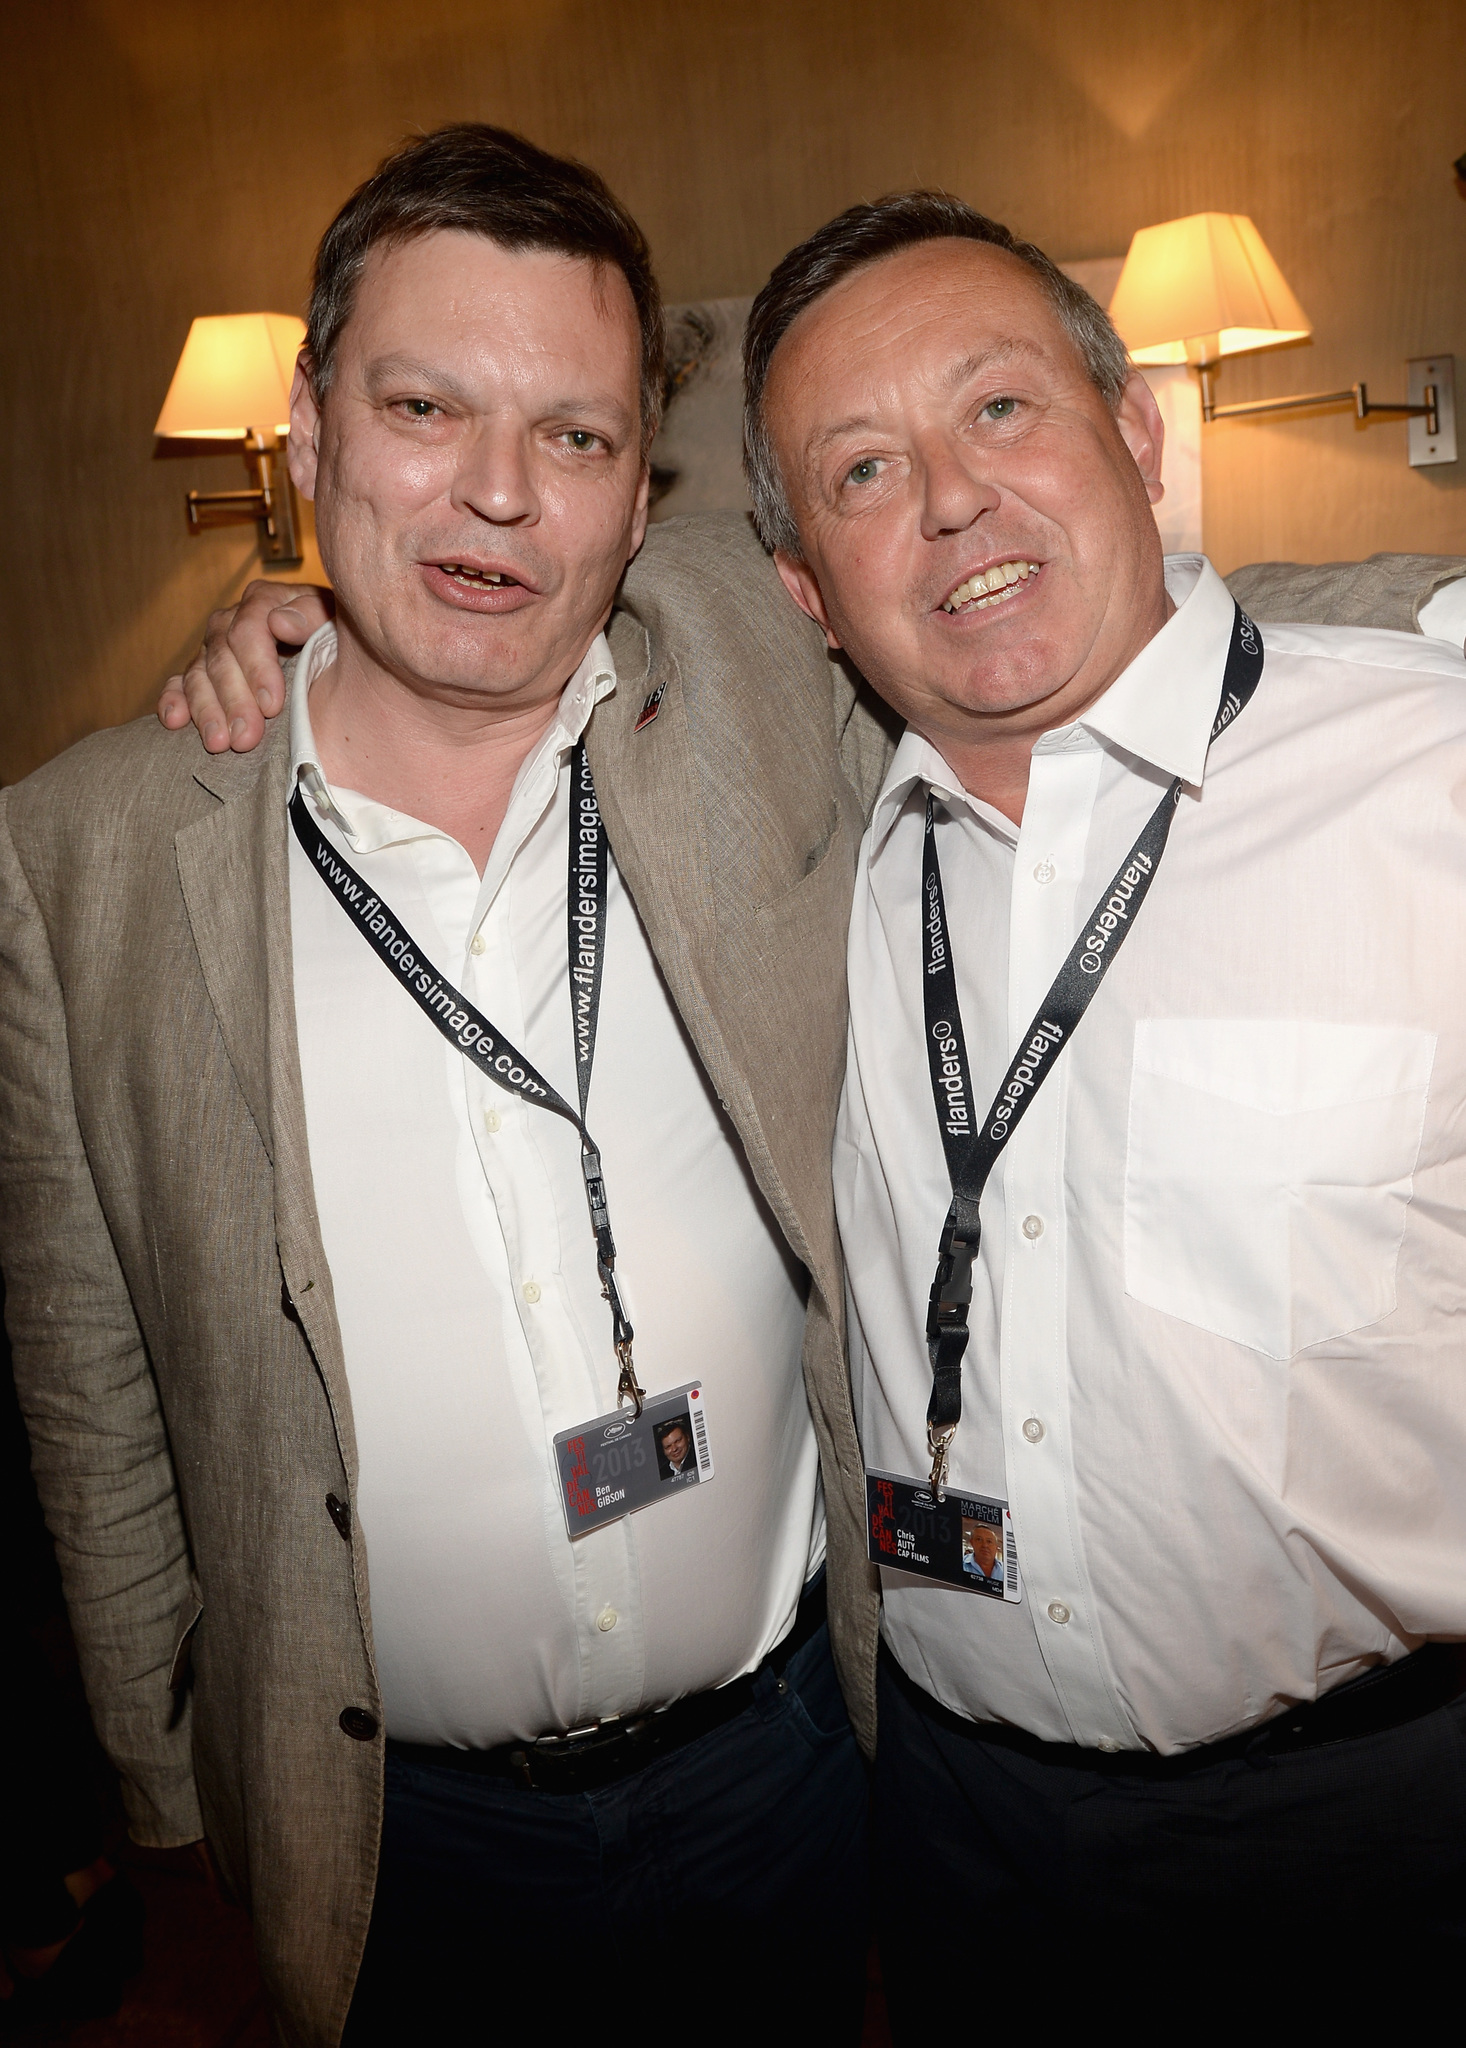 LFS' Ben Gibson and NFTS' Chris Auty attend the IMDB's 2013 Cannes Film Festival Dinner Party during the 66th Annual Cannes Film Festival at Restaurant Mantel on May 20, 2013 in Cannes, France.